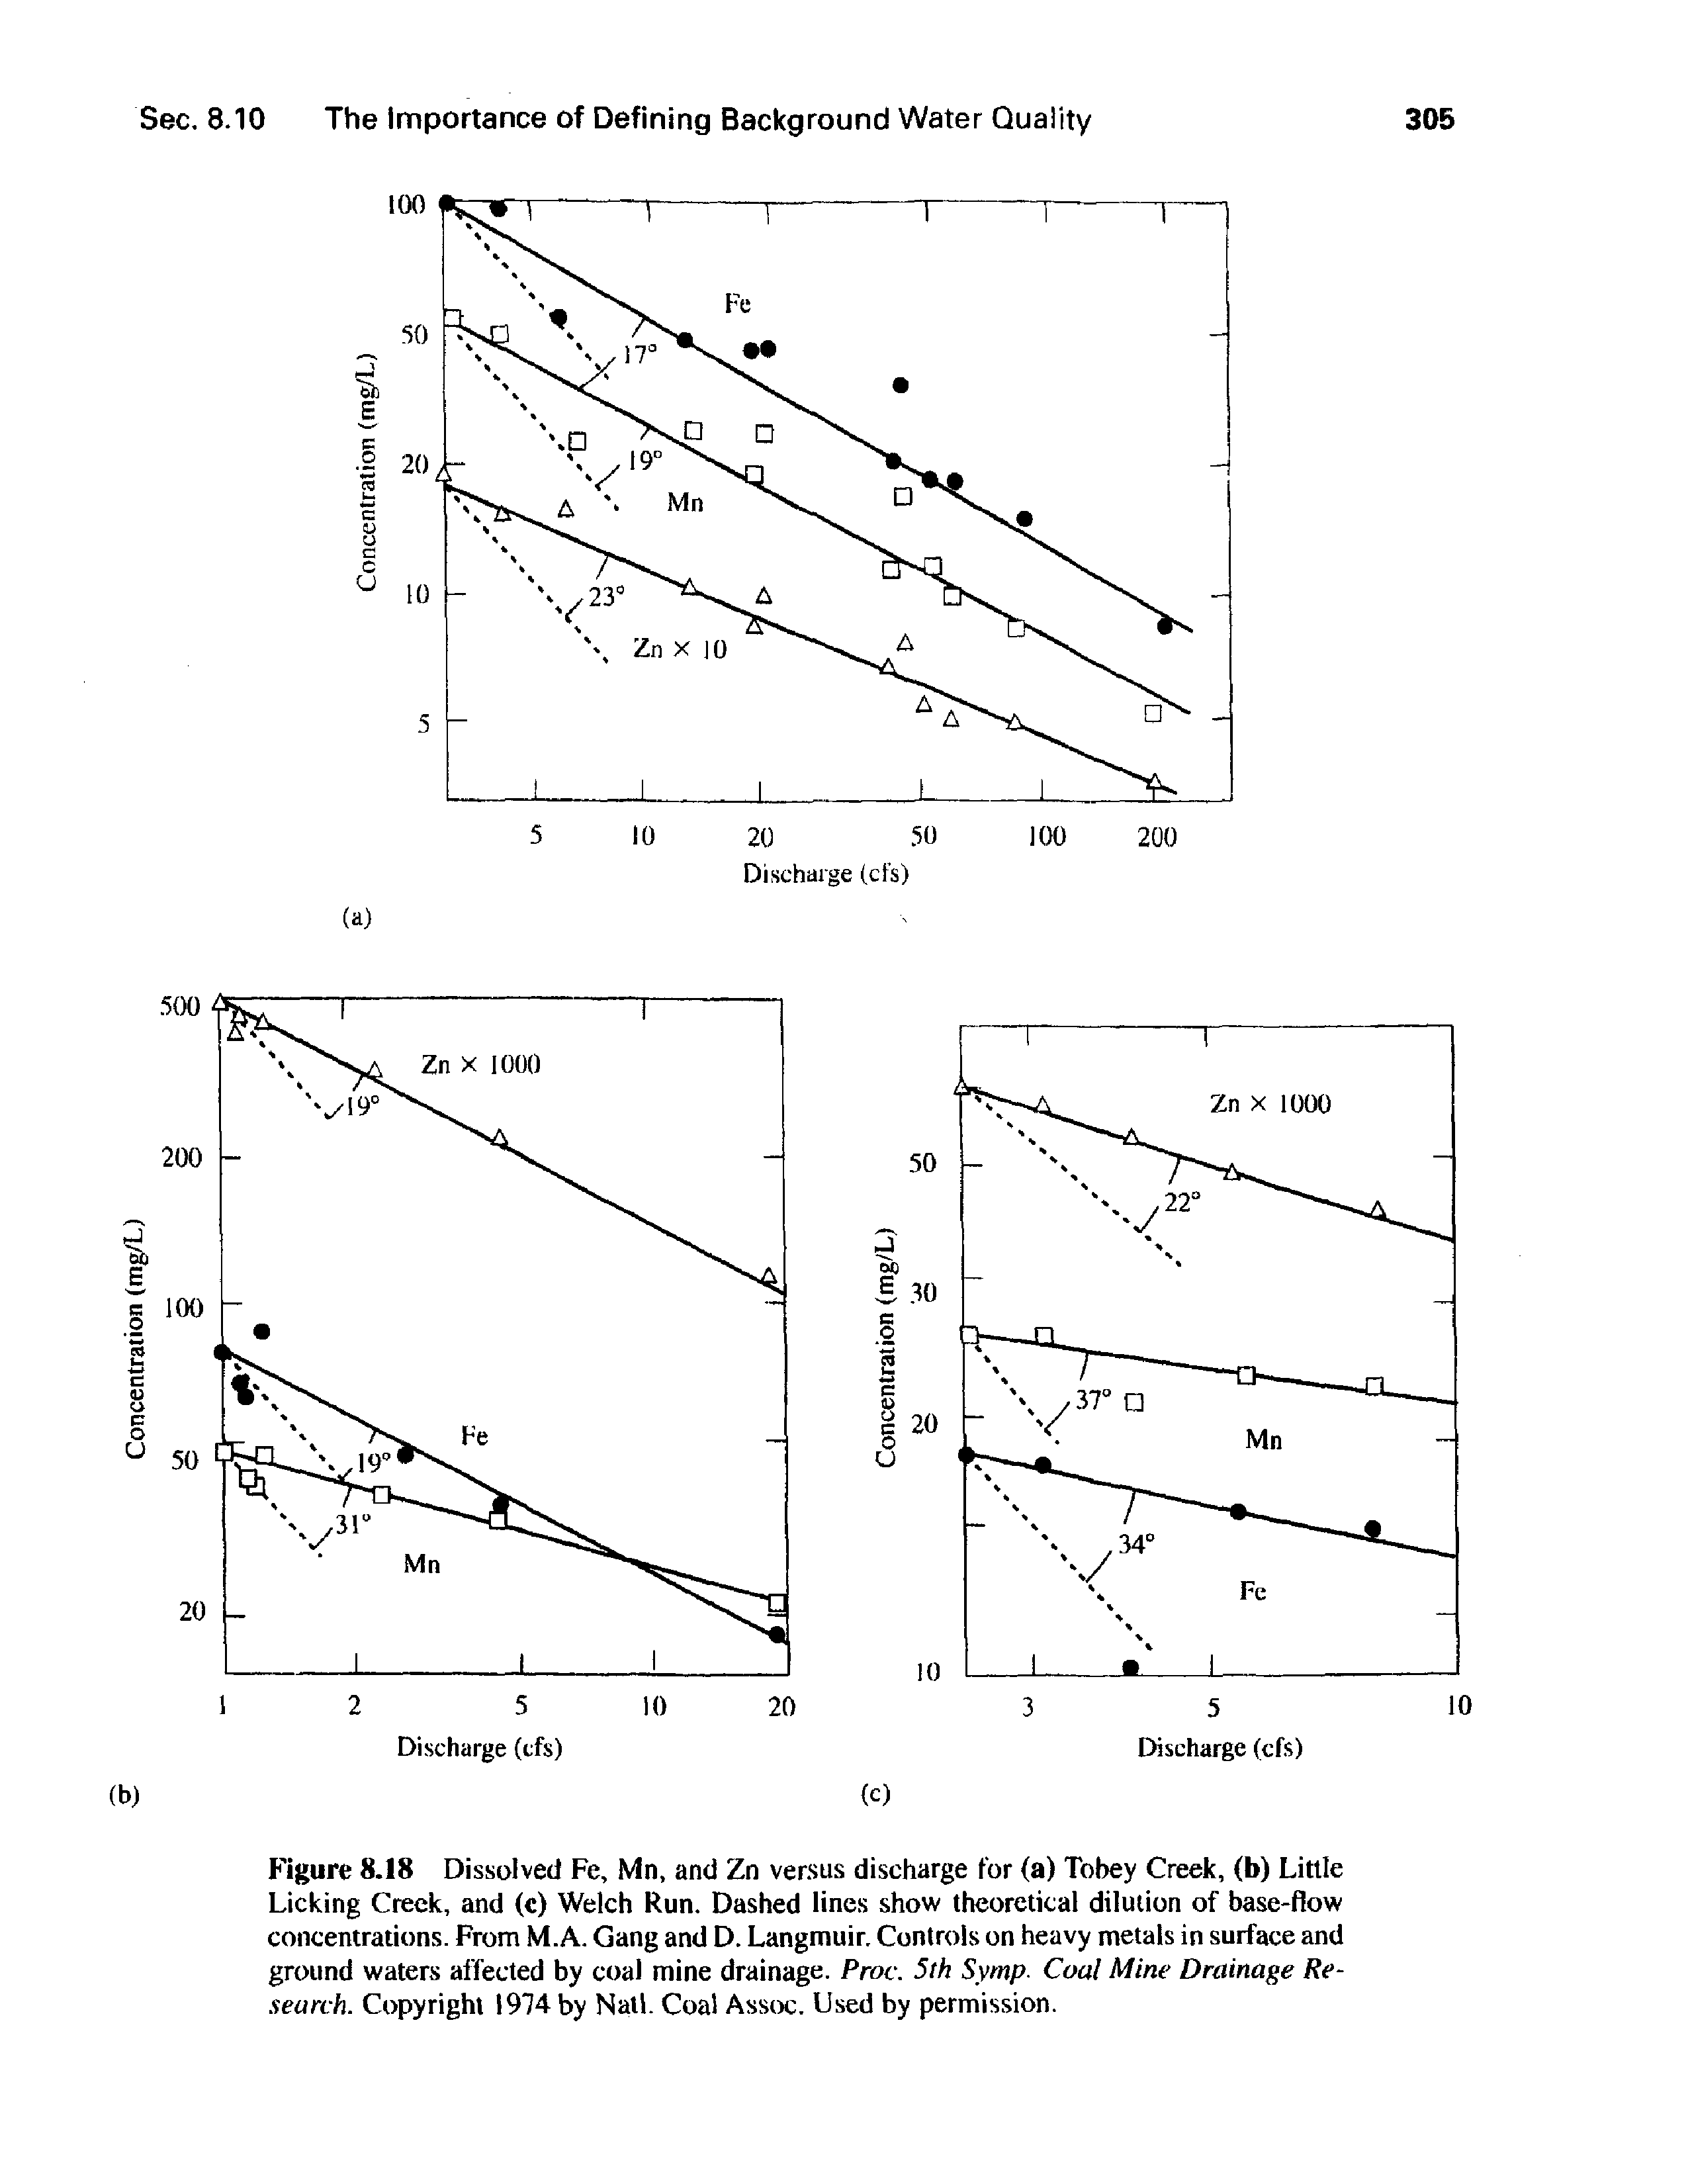 Figure 8.18 Dissolved Fe, Mn, and Zn versus discharge for (a) Tobey Creek, (b) Little Licking Creek, and (c) Welch Run. Dashed lines show theoretical dilution of base-flow concentrations. From M.A. Gang and D. Langmuir. Controls on heavy metals in surface and ground waters affected by coal mine drainage. Prov. 5th Syrnp- Coal Mine Drainage Research. Copyright 1974 by Natl. Coal Assck. Used by permission.